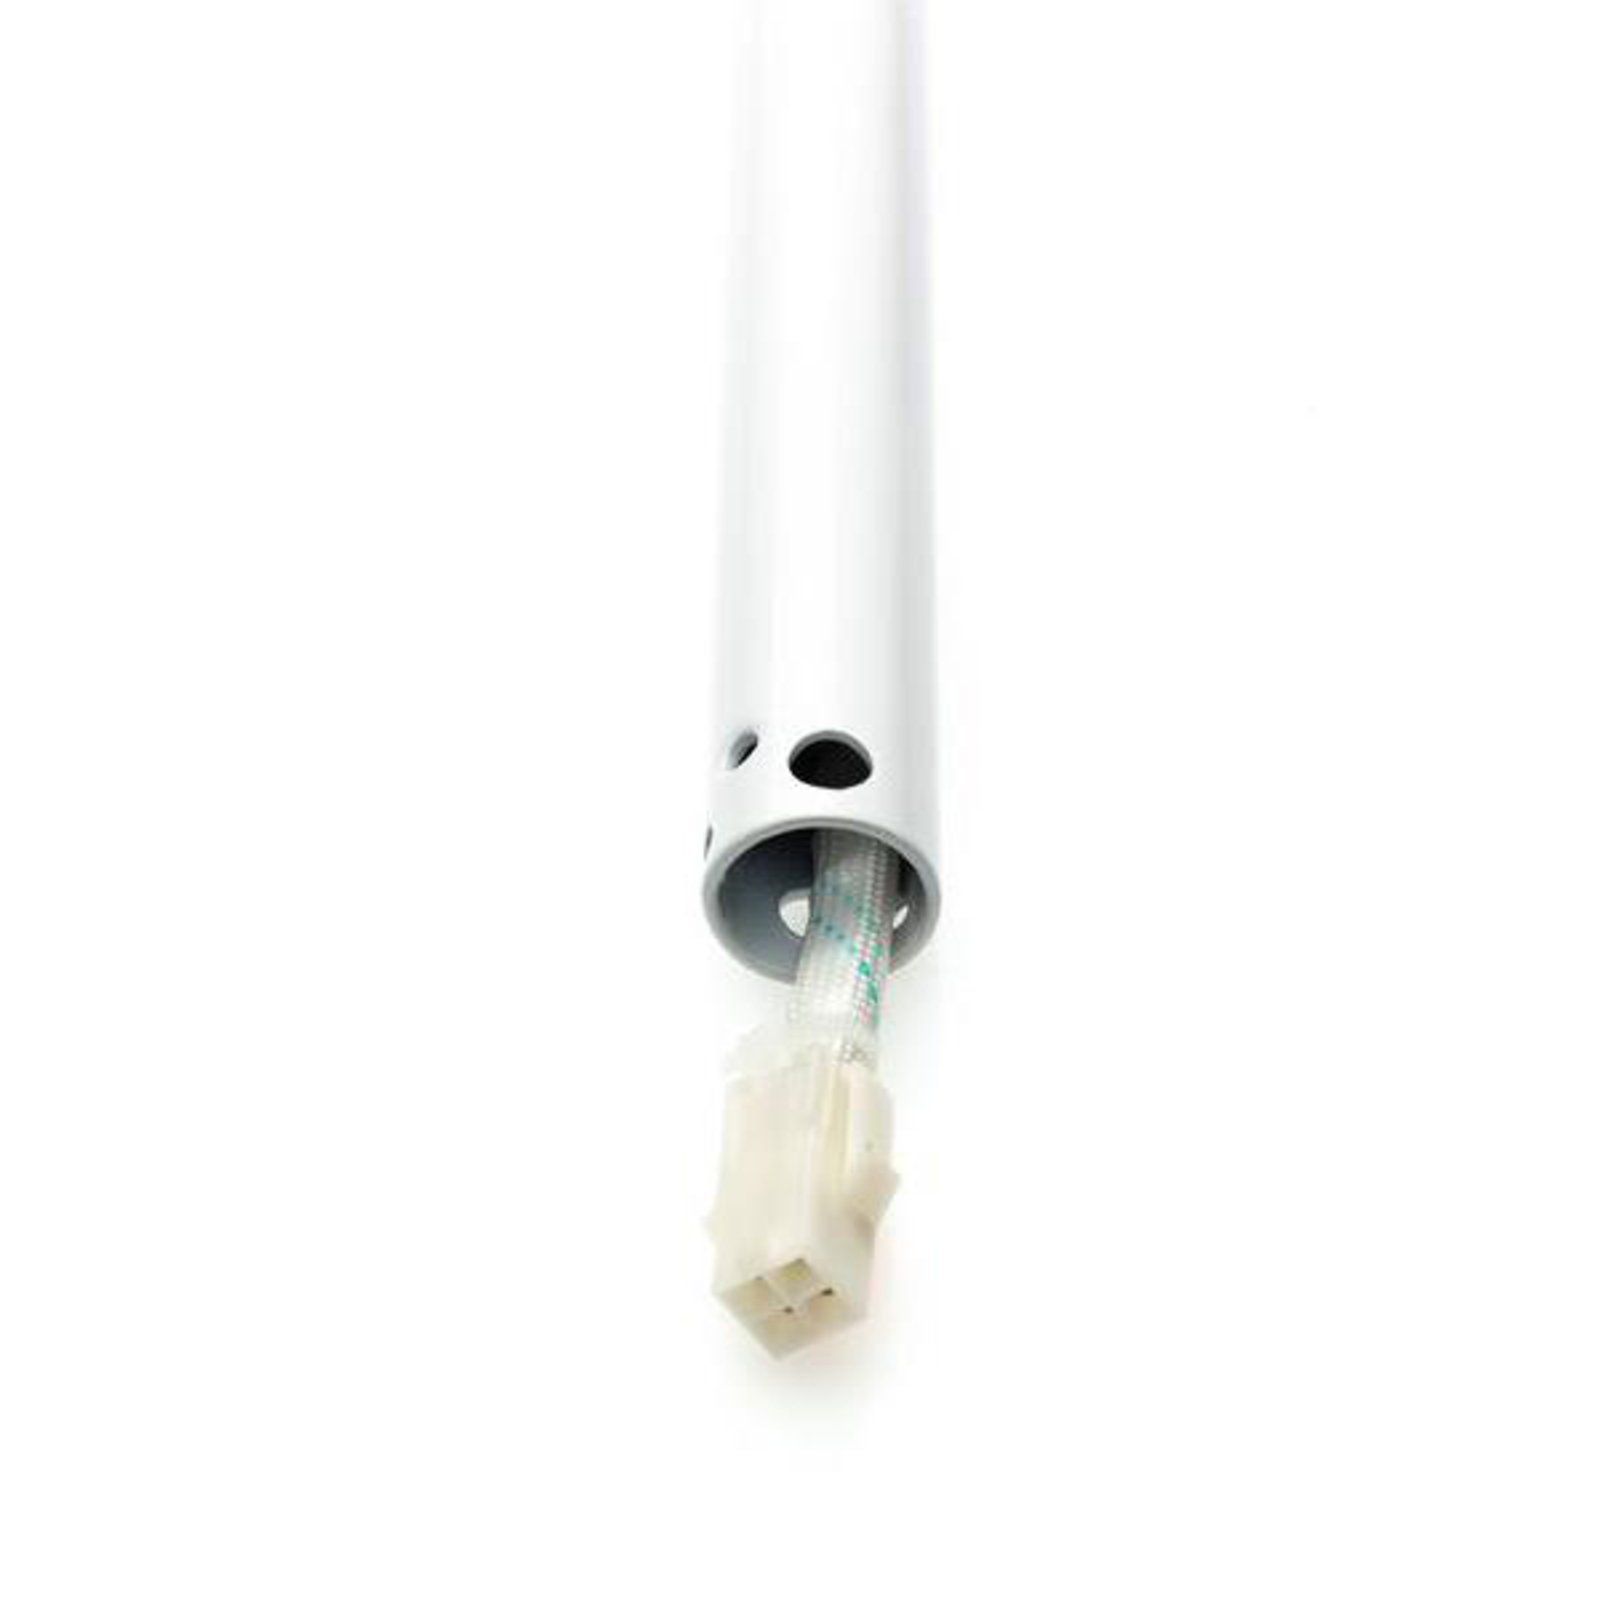 46 cm extension rod in white